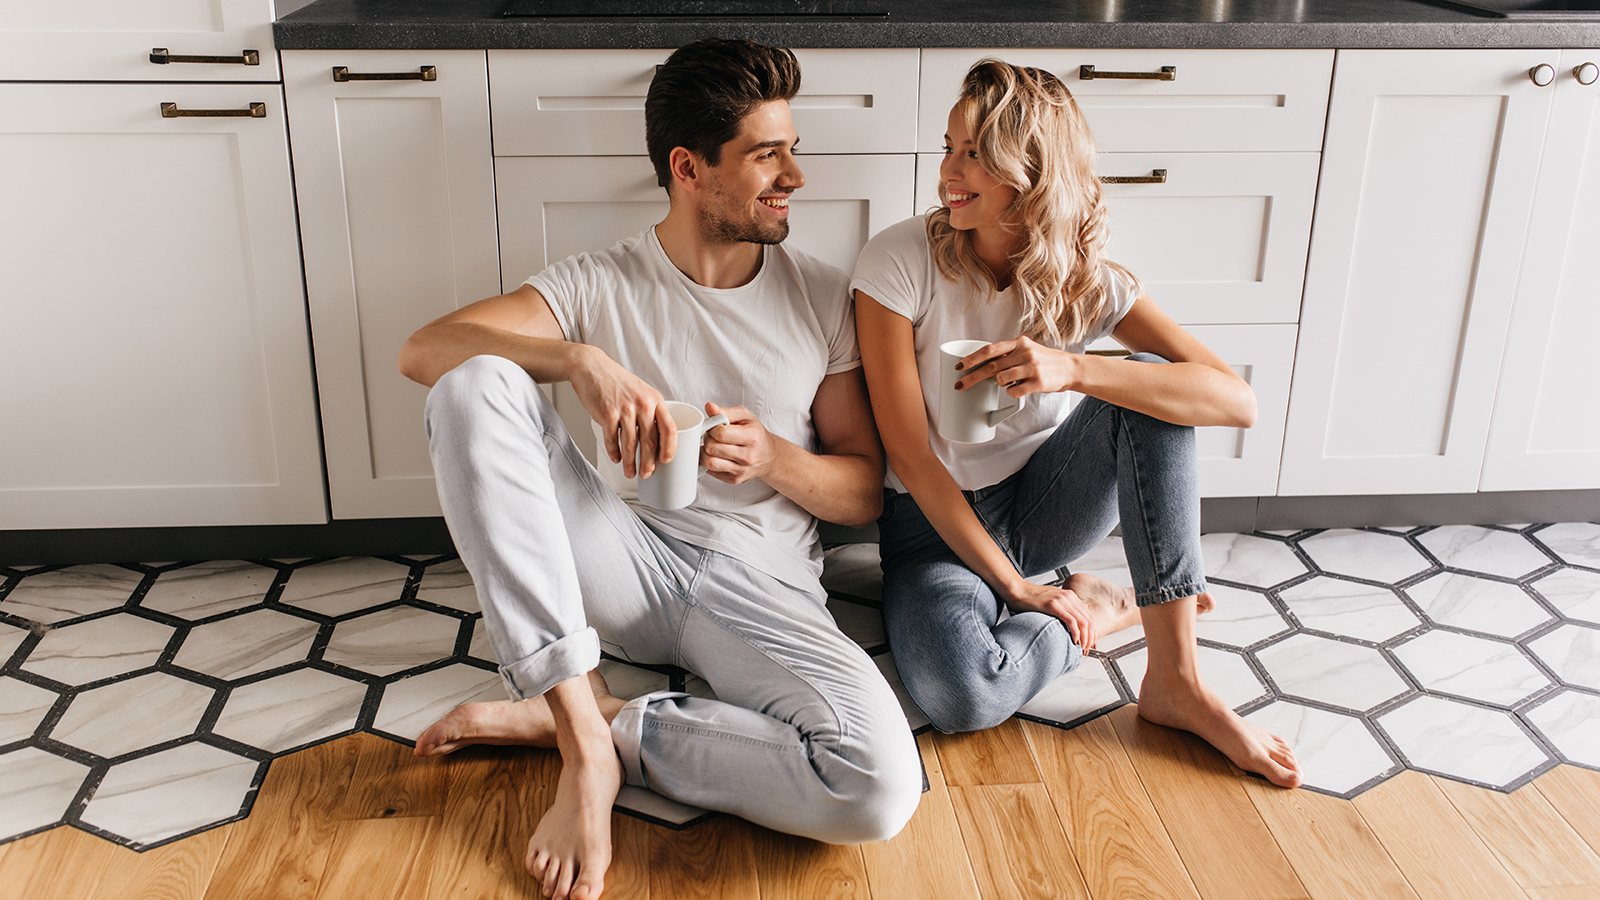 Lovely girl in jeans sitting on the floor and talking with boyfriend. Young couple enjoying coffee in kitchen.